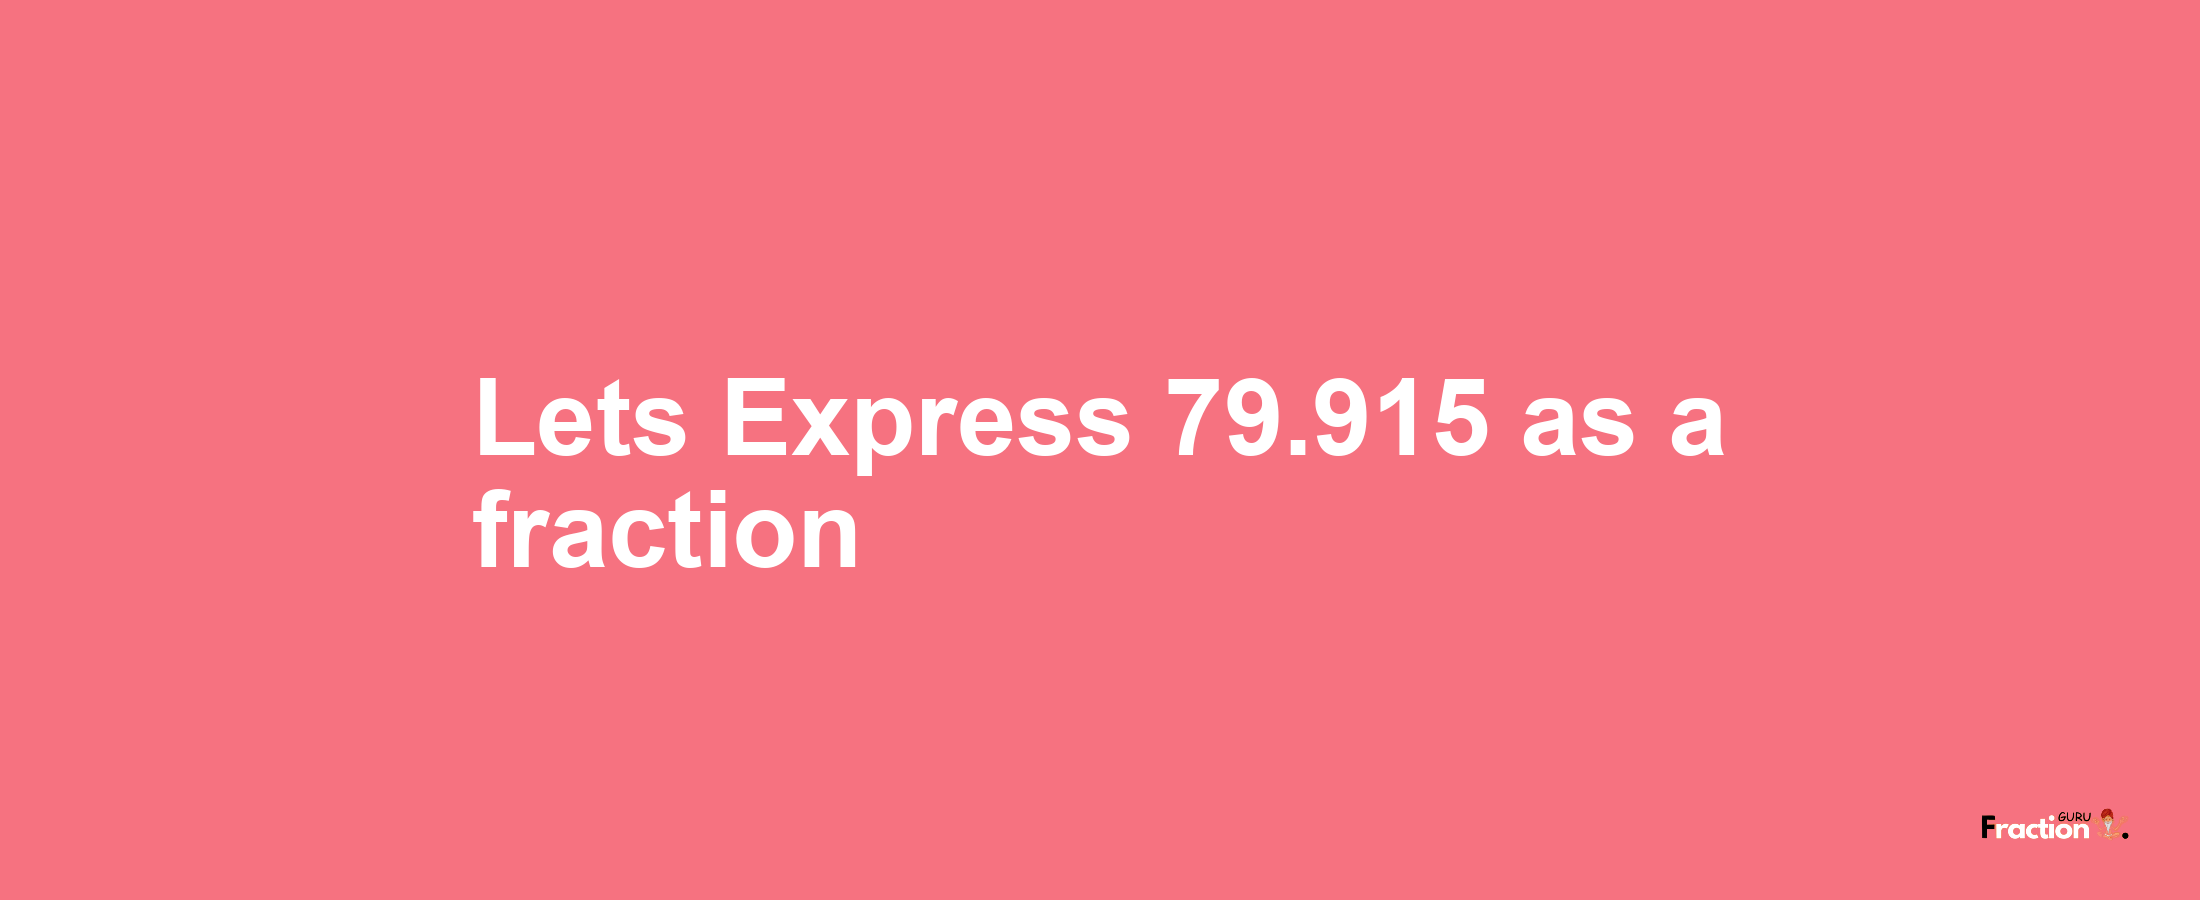 Lets Express 79.915 as afraction